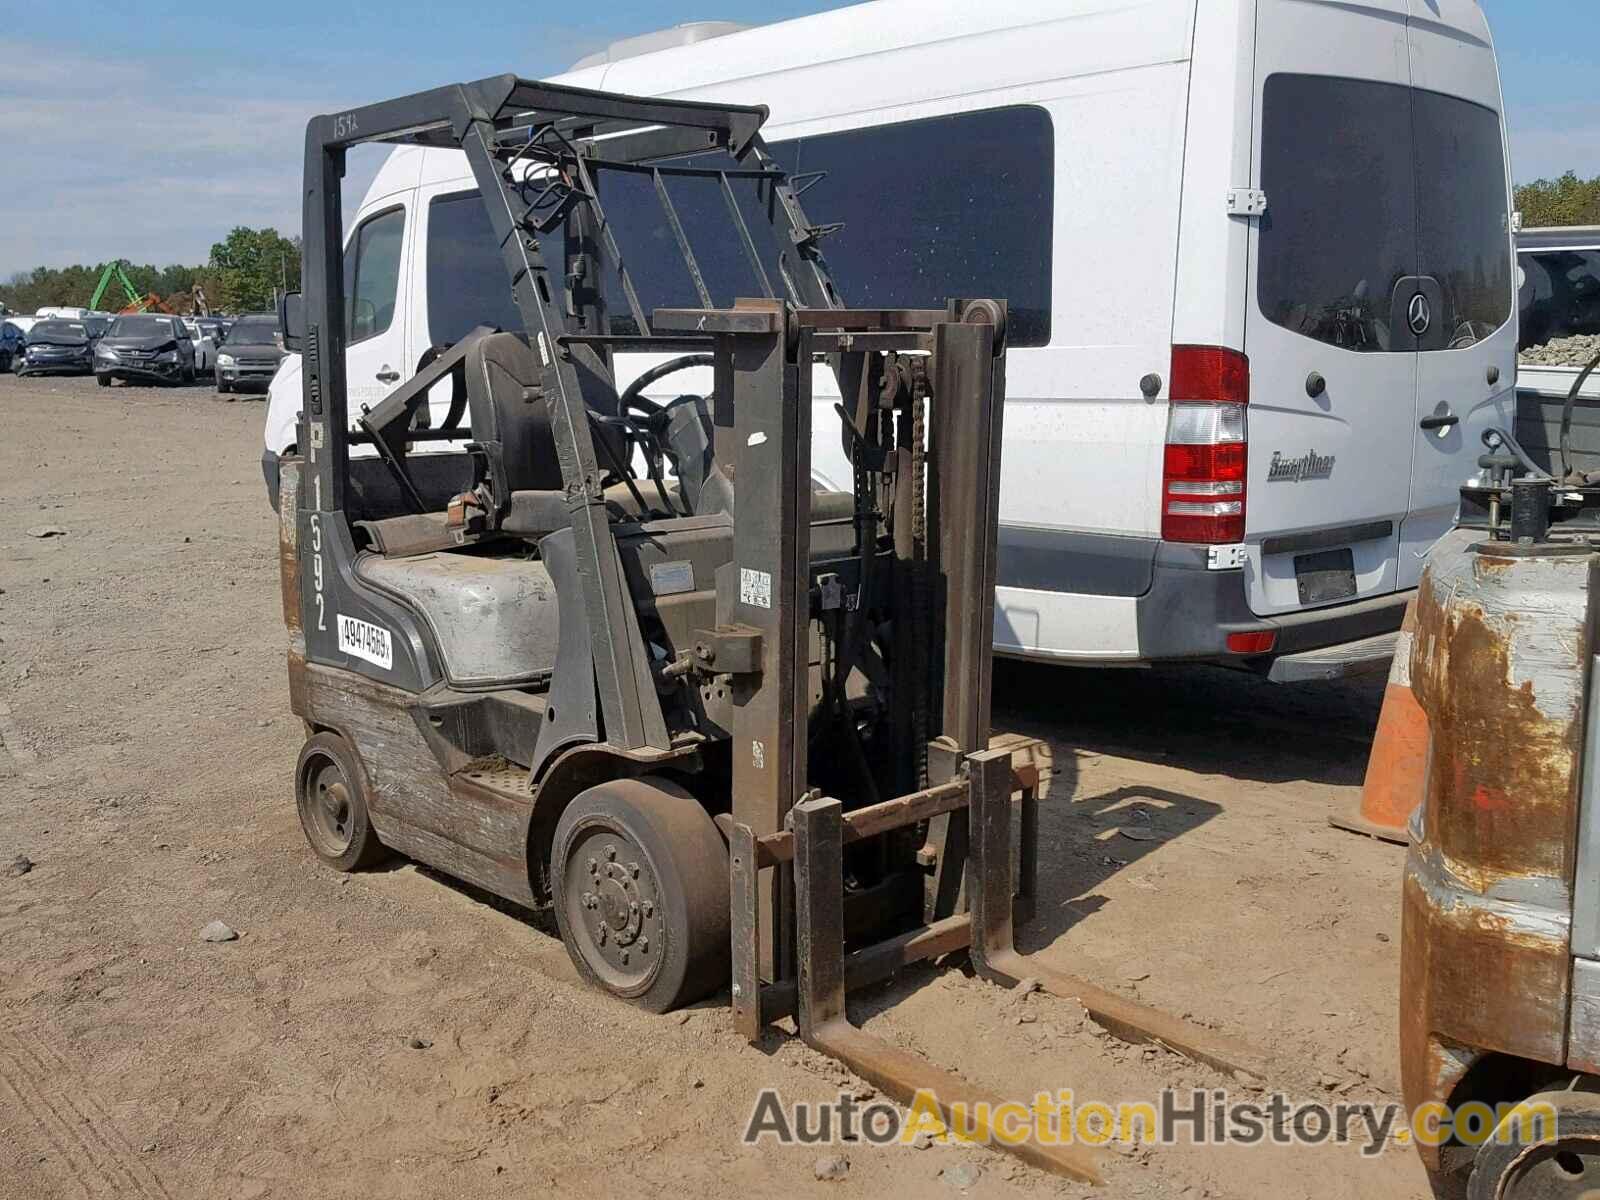 2004 NISSAN FORK LIFT, CPL029P0997